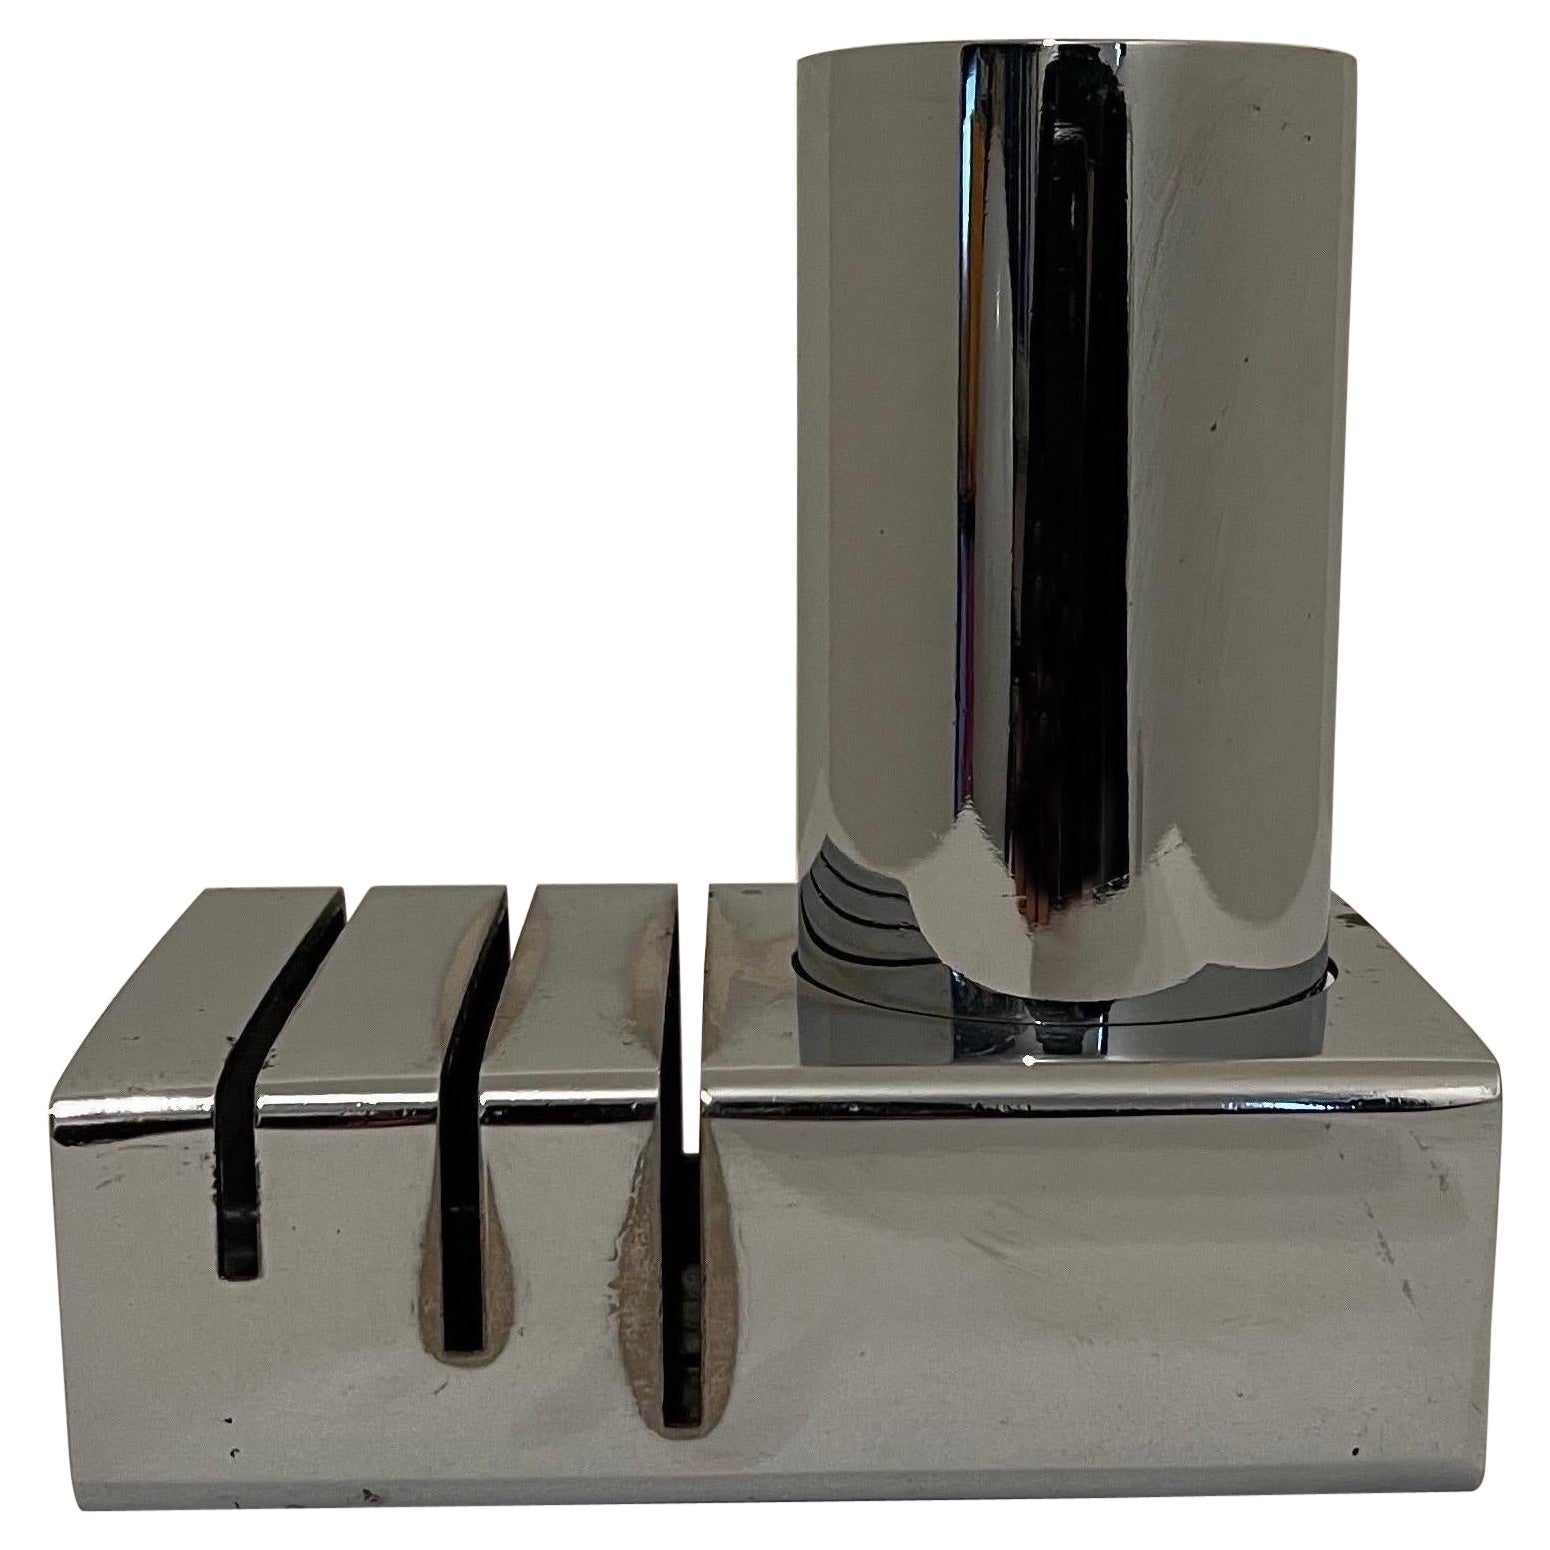 Chrome Modernist Space Age Desk Tidy / Holder - Italy c1960s For Sale